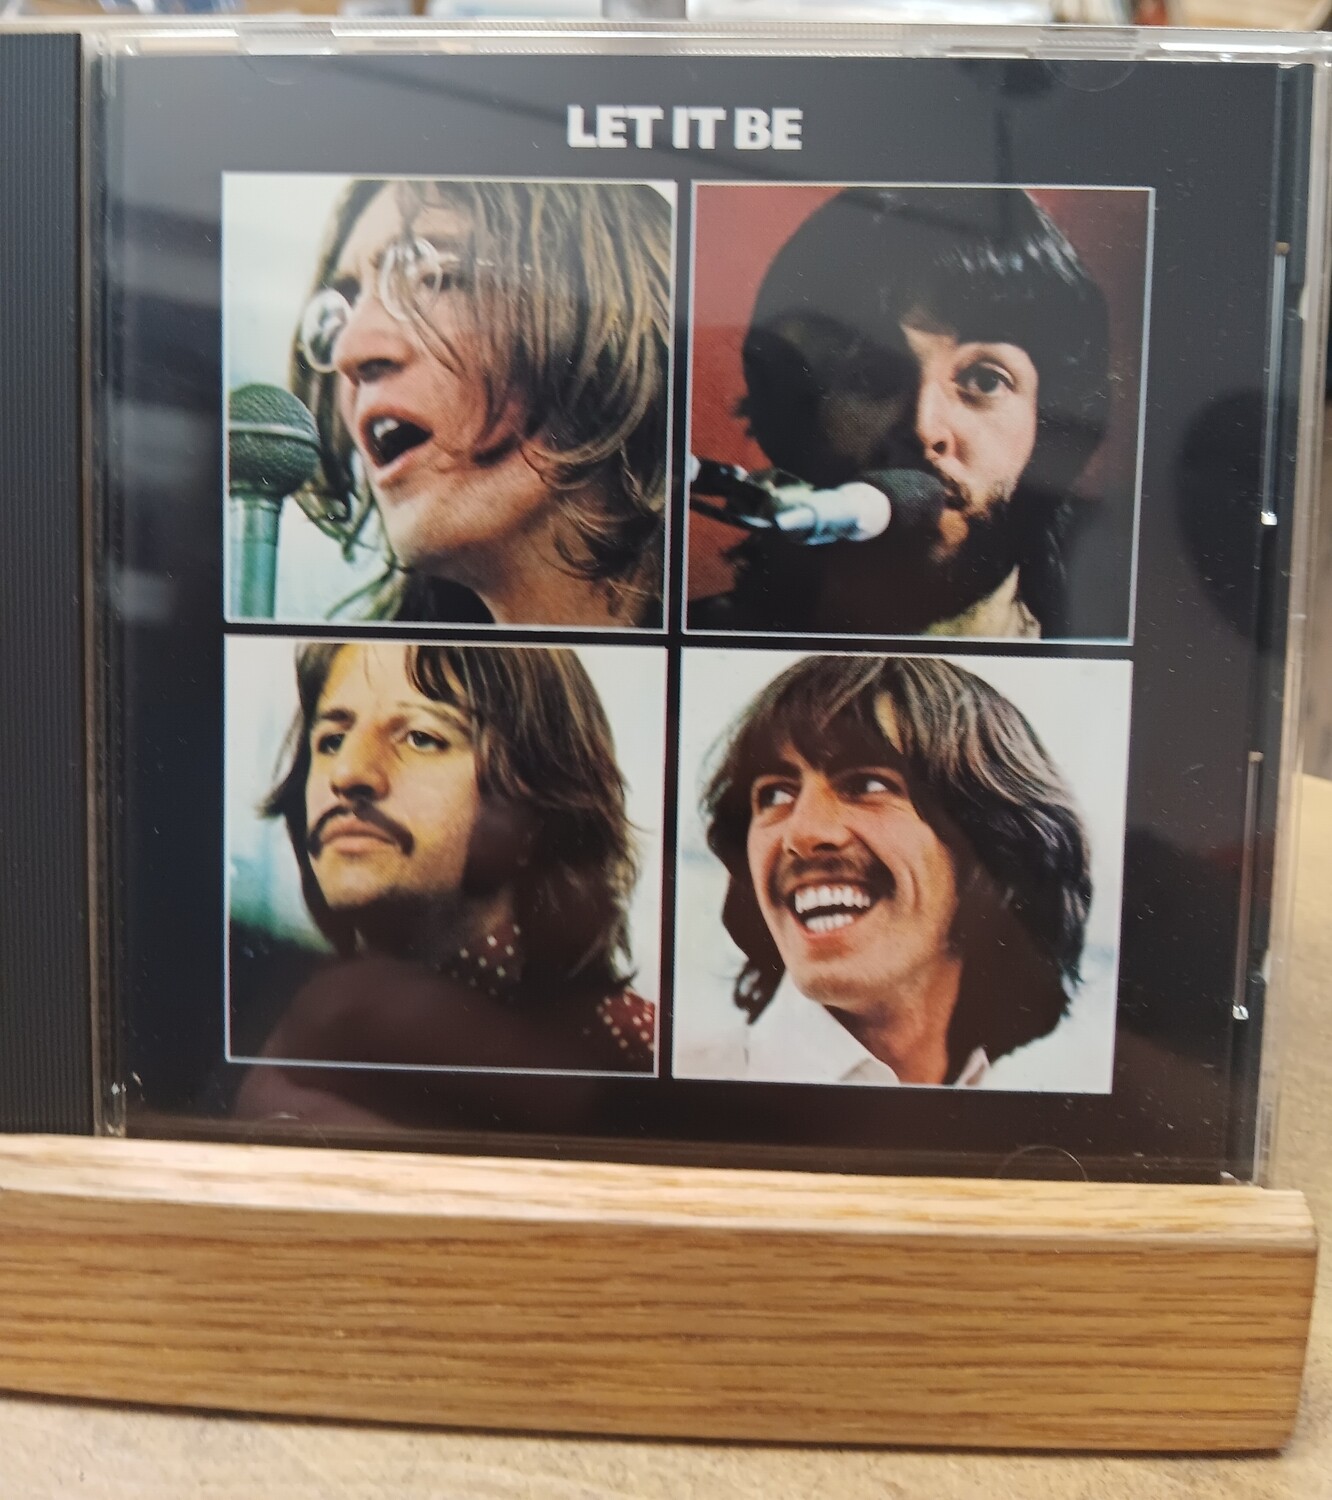 THE BEATLES - Let it be (CD)